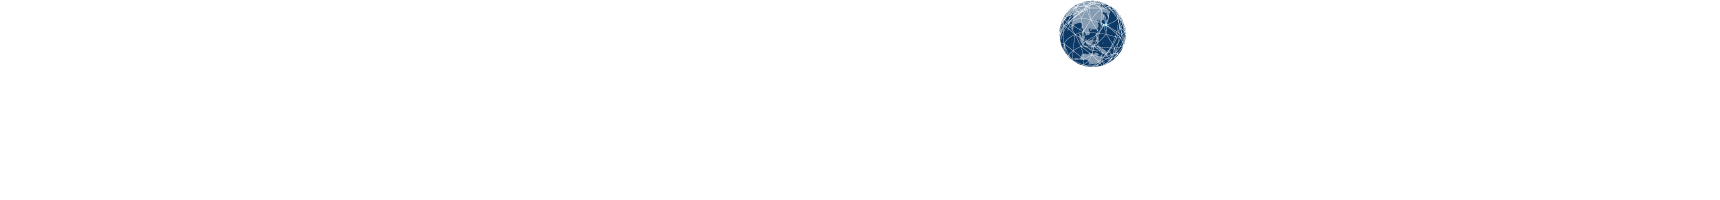 WCMISST [7th World Congress of Minimally Invasive Spine Surgery & Techniques / 29th International Intradiscal Therapy Society (IITS)]